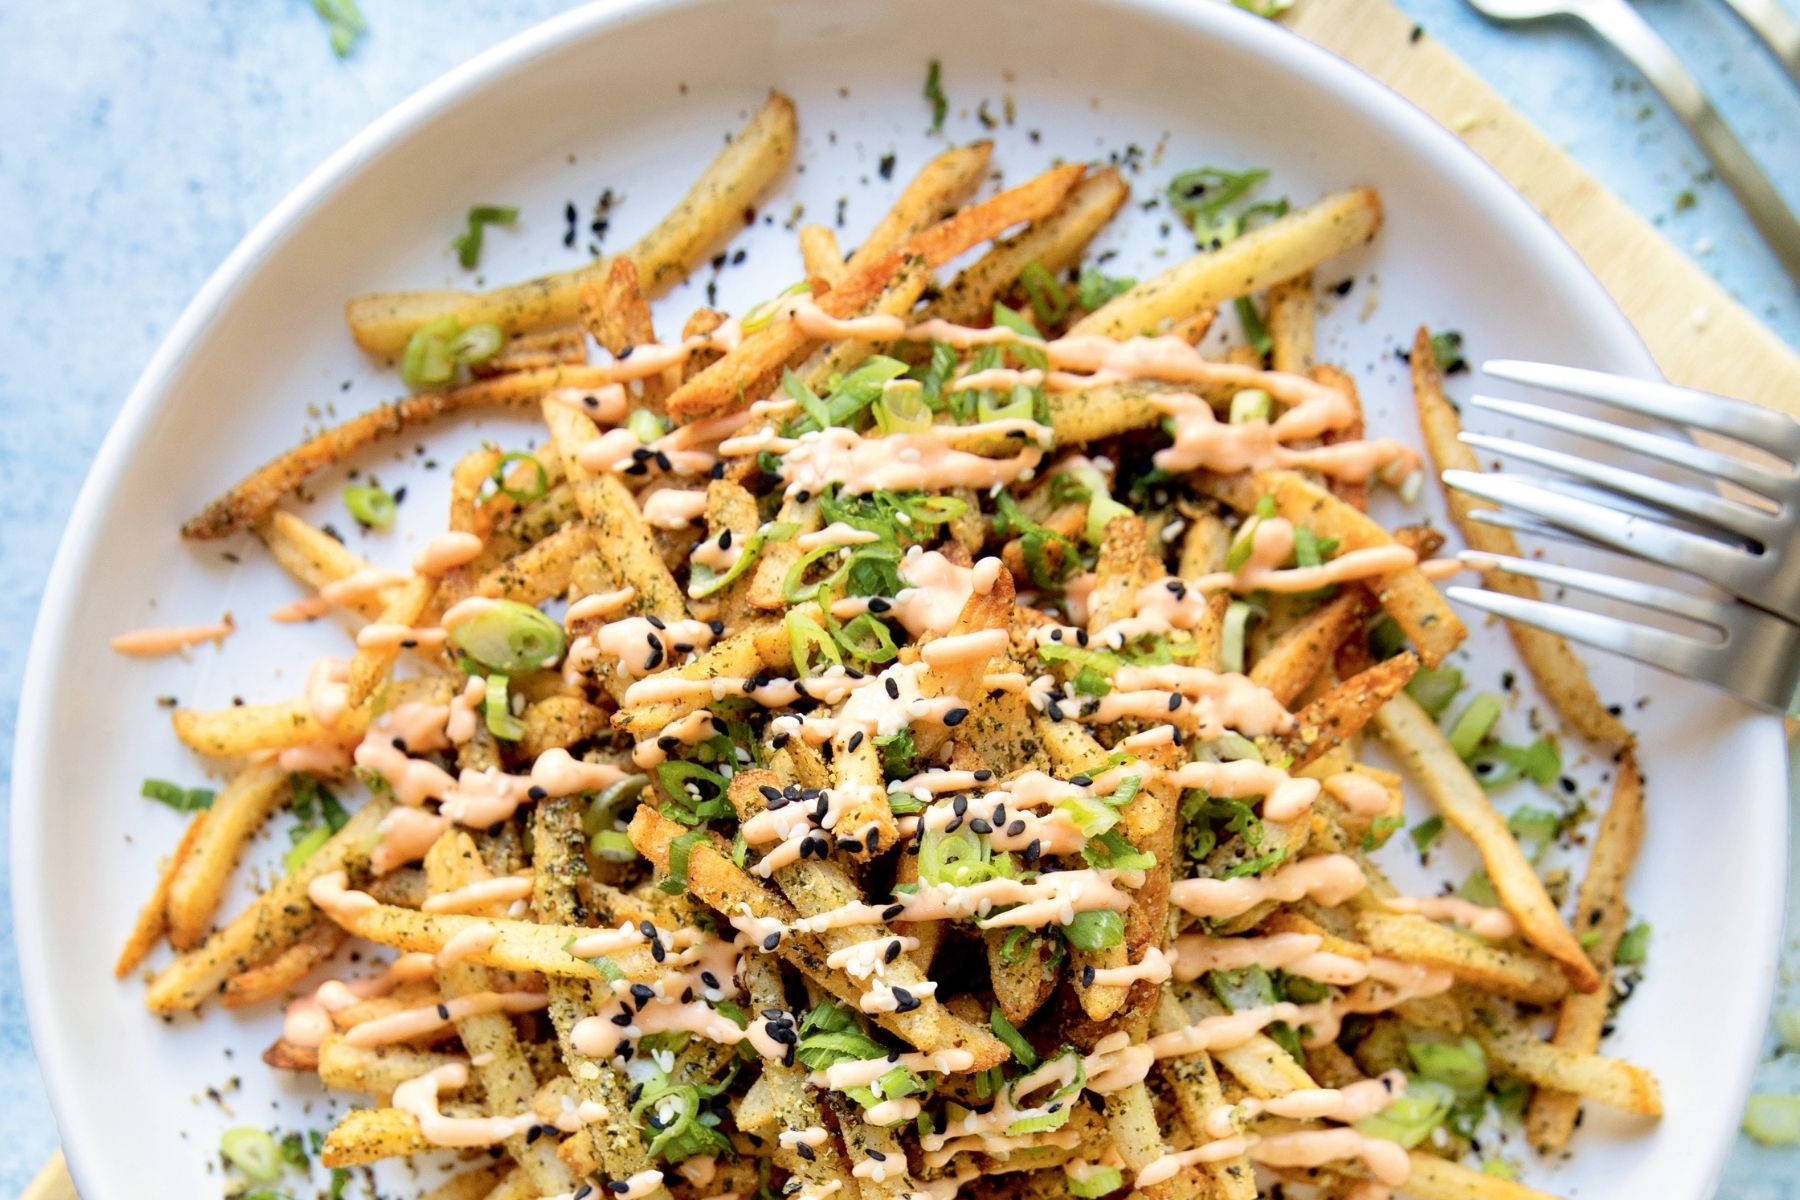 Shoestring fries covered in Japanese-inspired toppings